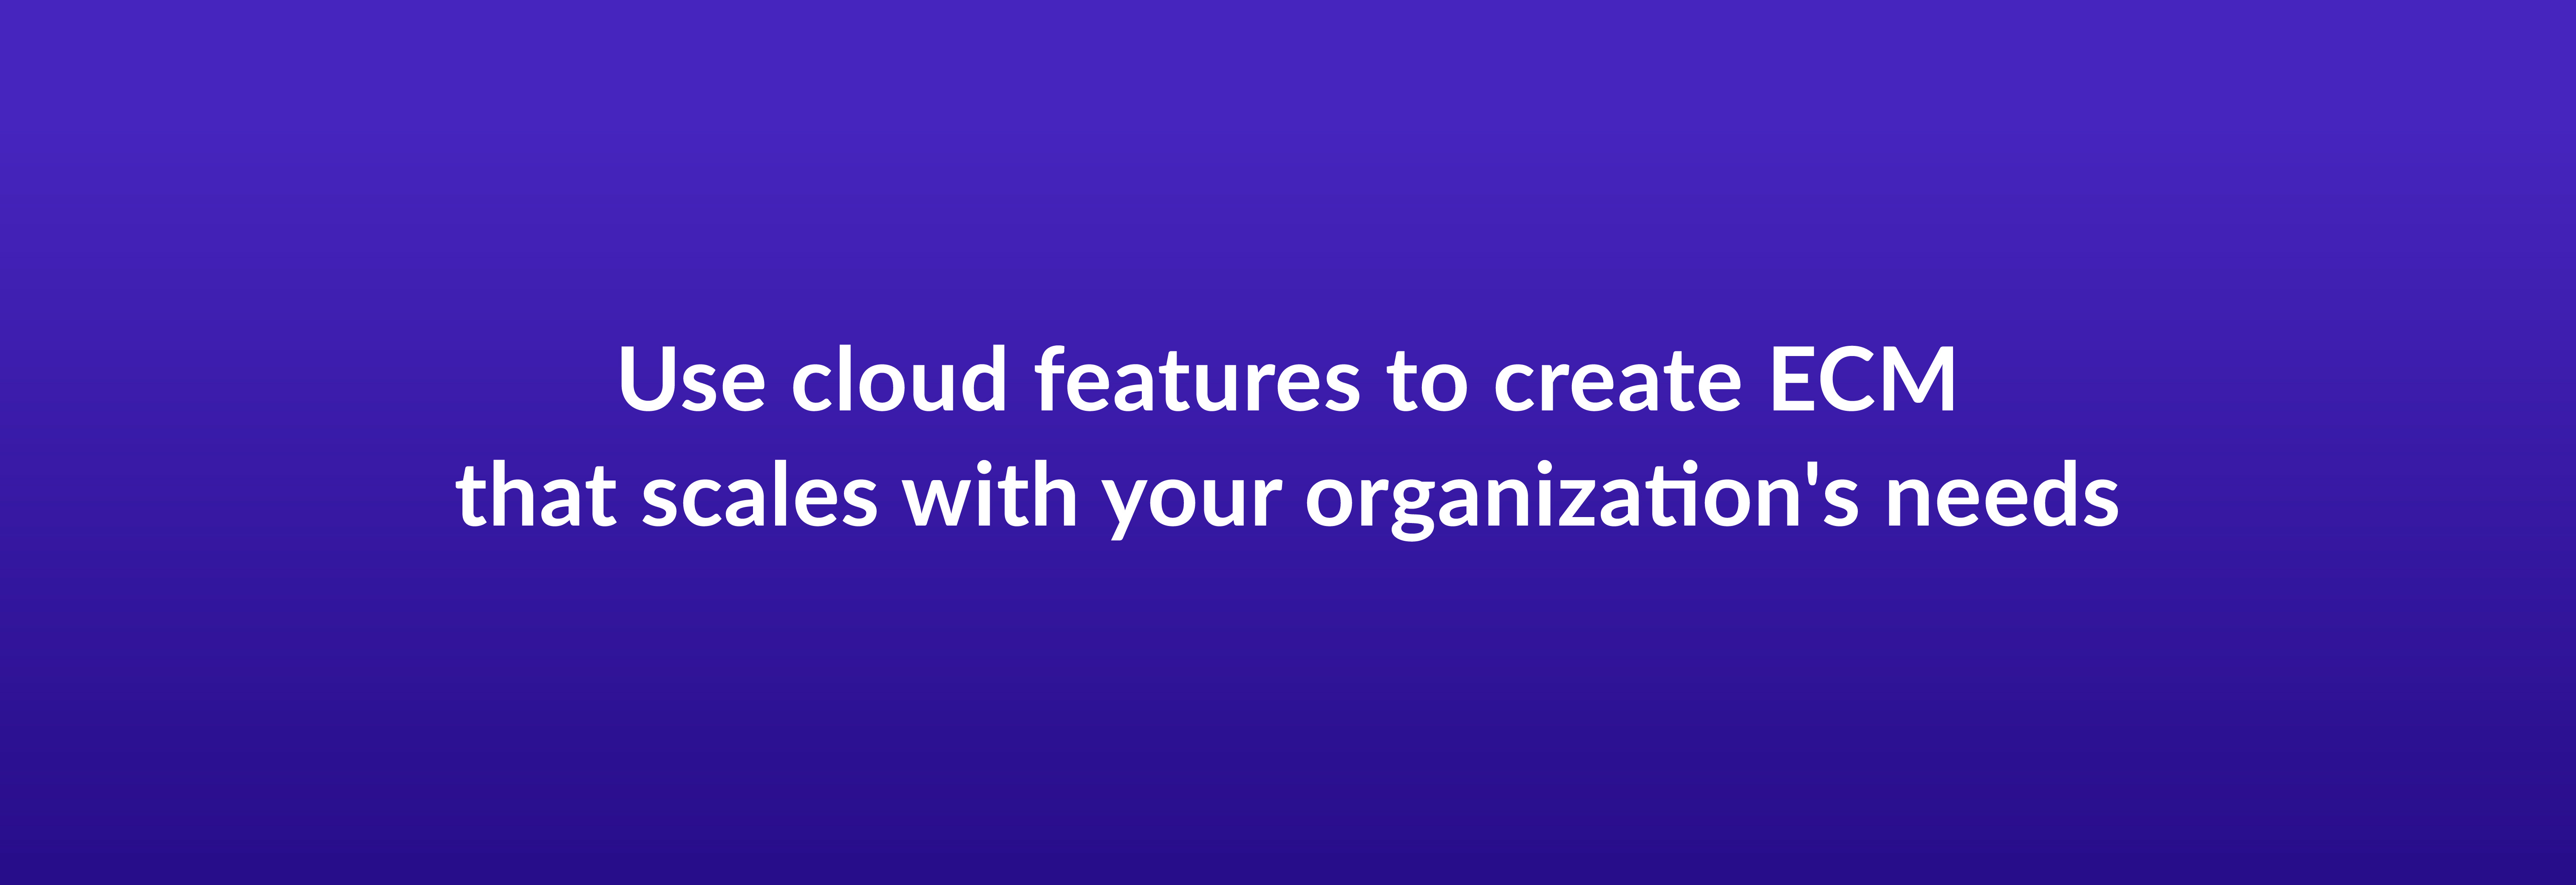 Use cloud features to create ECM that scales with your organization's needs